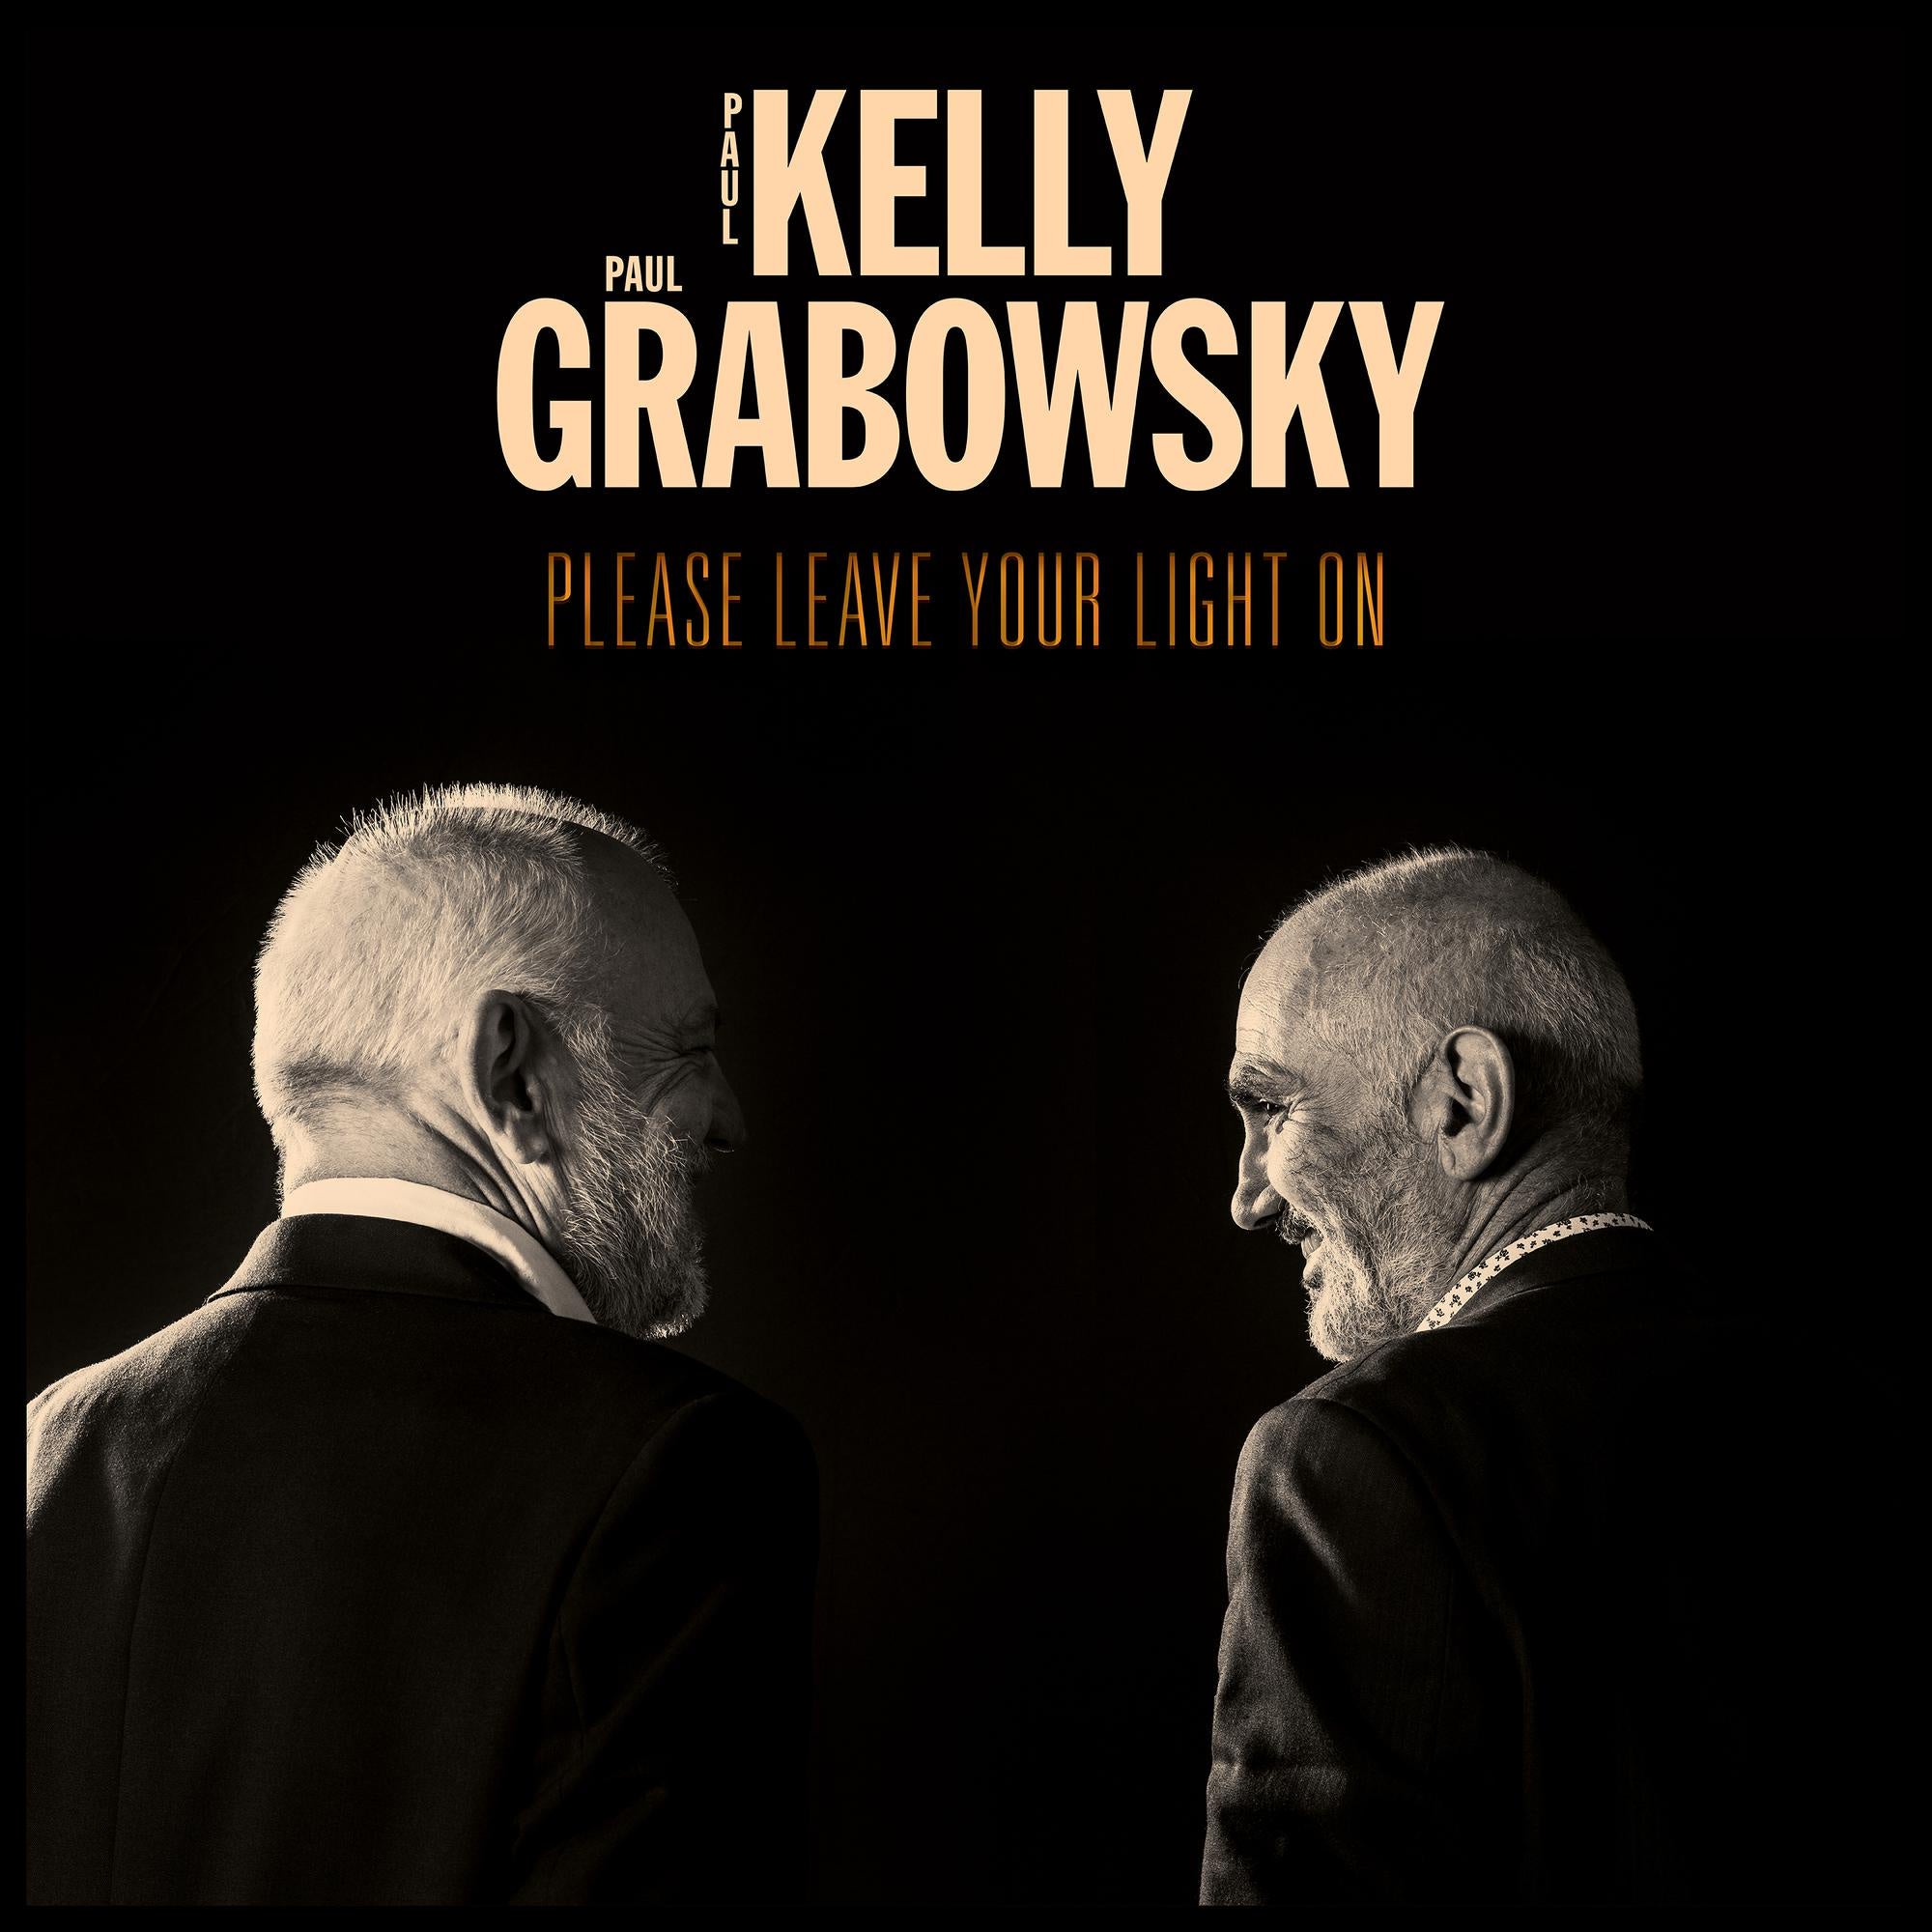 Paul Kelly / Paul Grabowsky ‎– Please Leave Your Light On - New LP Record 2020 Cooking Europe Import Vinyl - Jazz